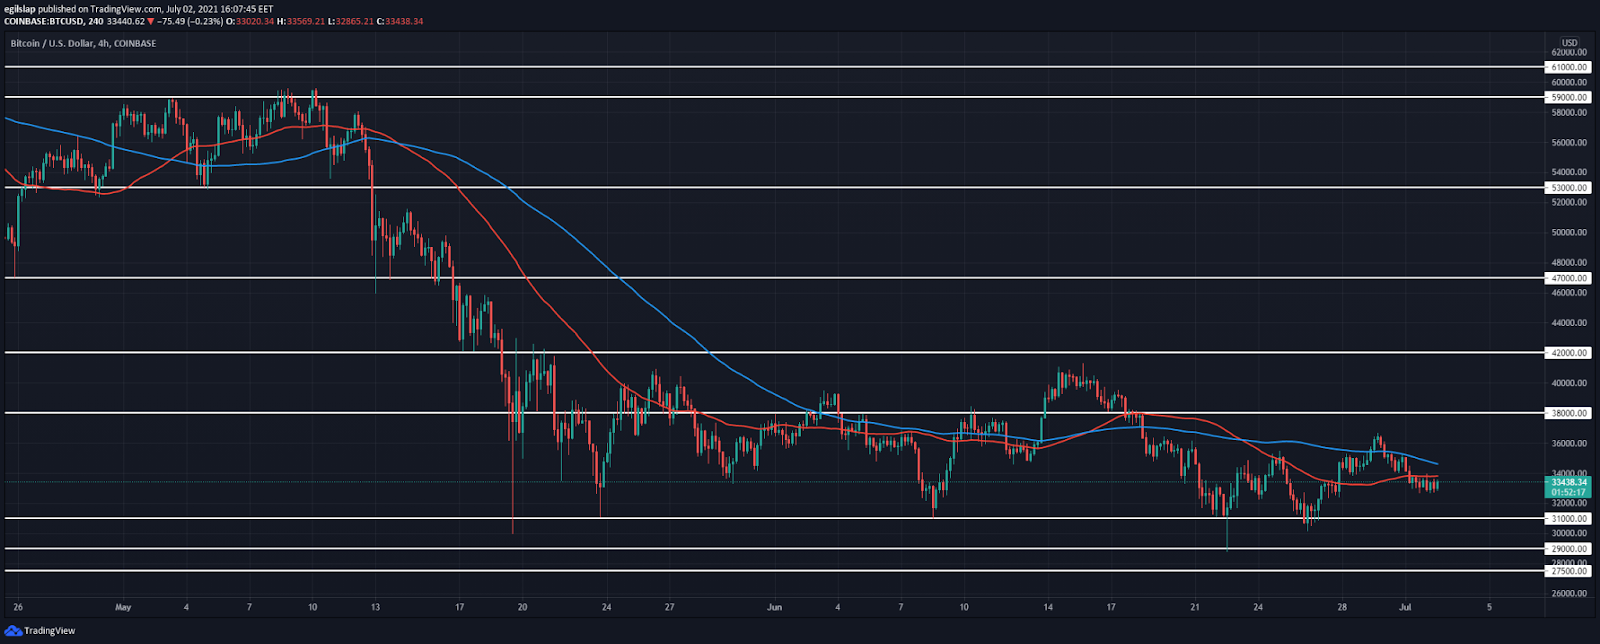 Bitcoin price analysis: Bitcoin establishes a higher low around $33,000, ready to push higher?